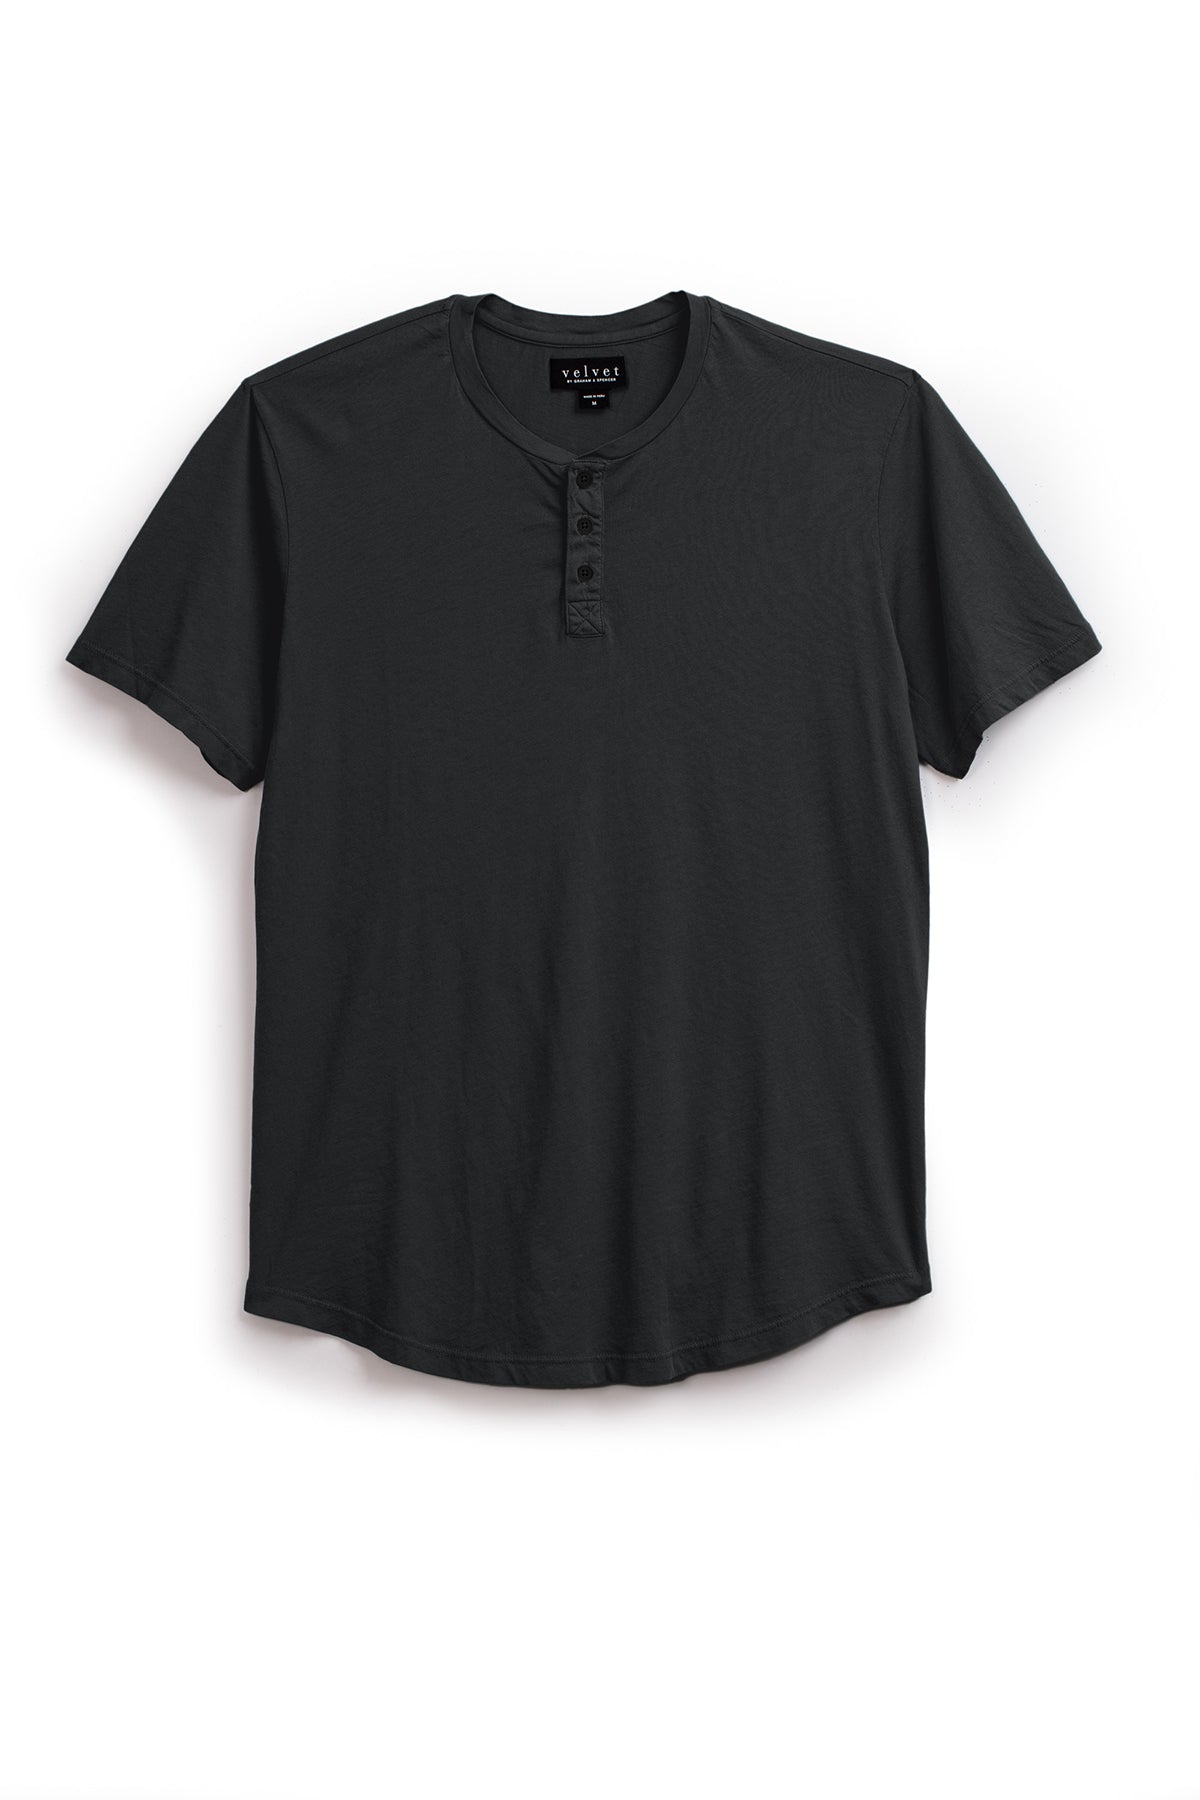 Black Fulton Henley tee with short sleeves and a button placket, isolated on a white background by Velvet by Graham & Spencer.-24559747367105